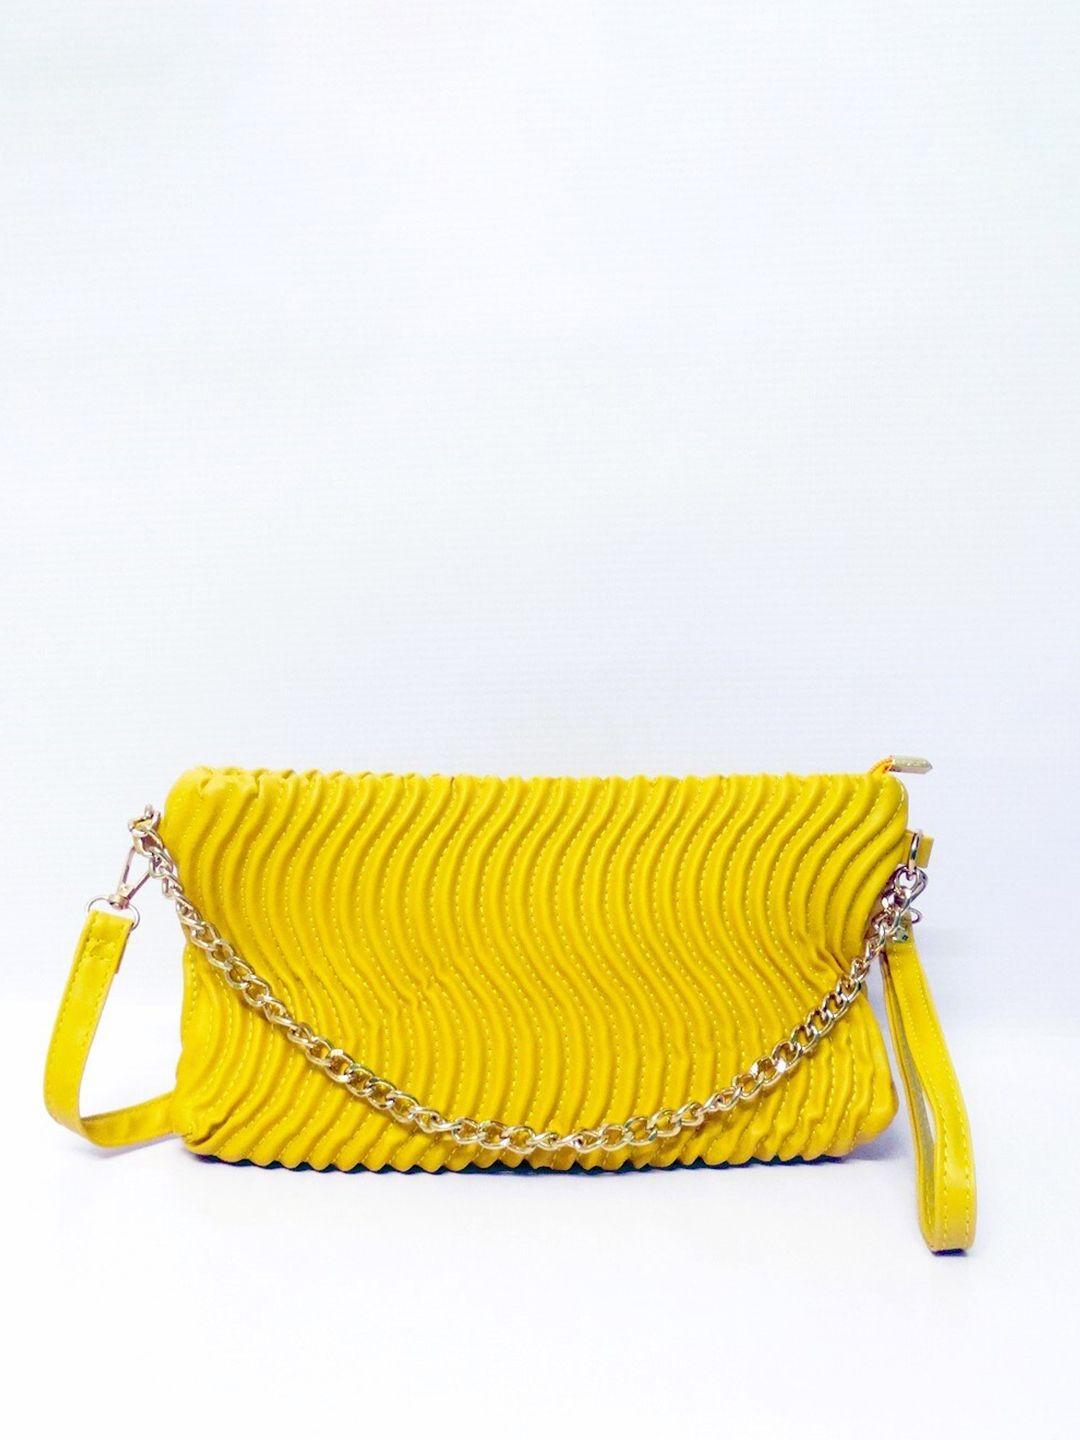 chronicle yellow textured quilted purse clutch